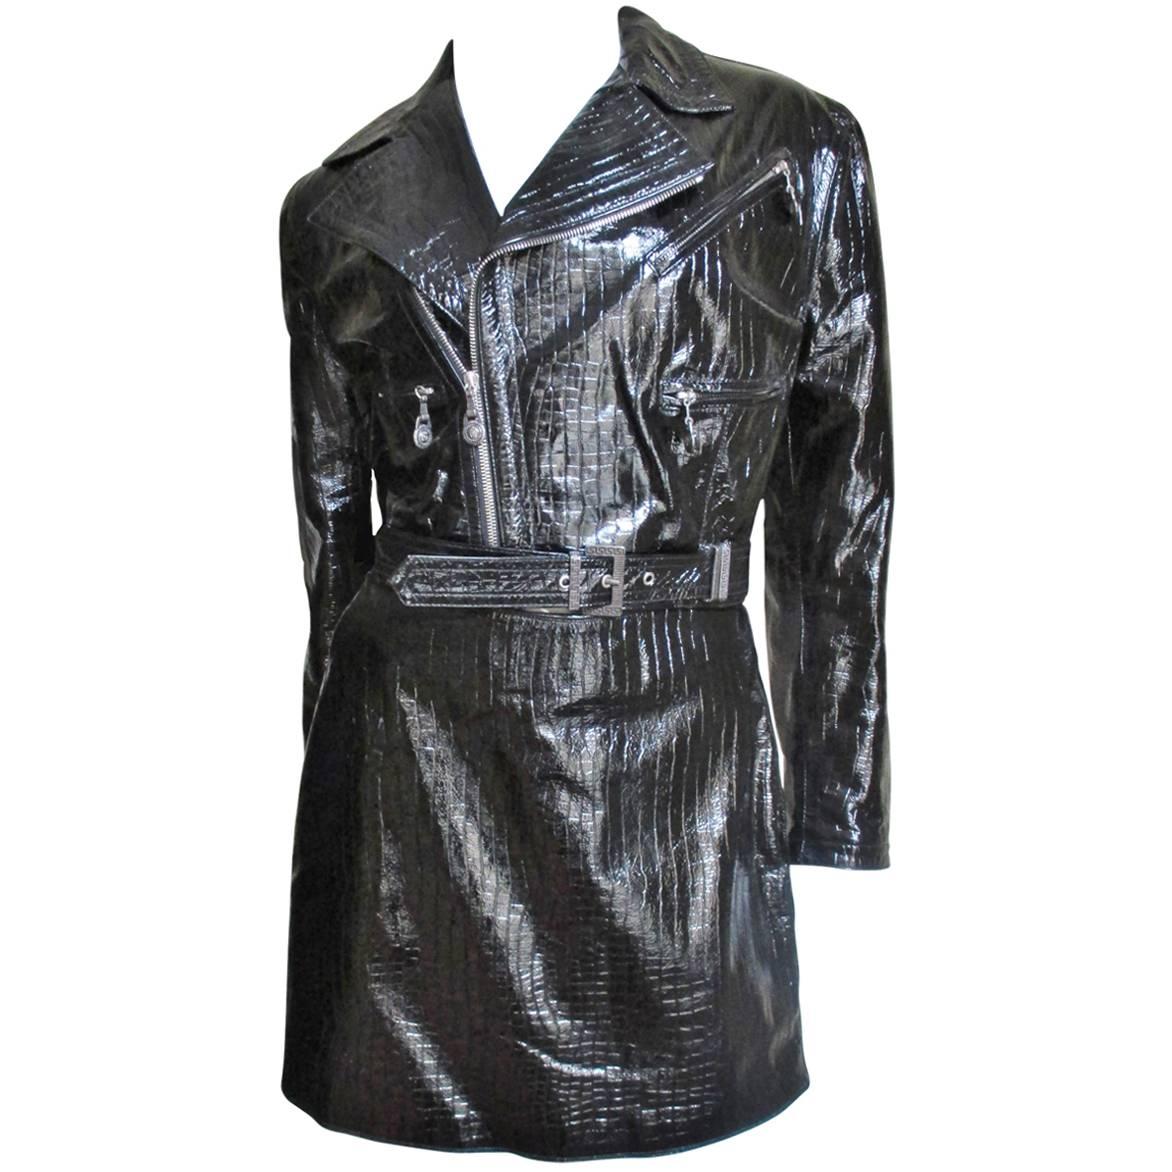 1990s Gianni Versace Patent Leather Motorcycle Jacket and Skirt